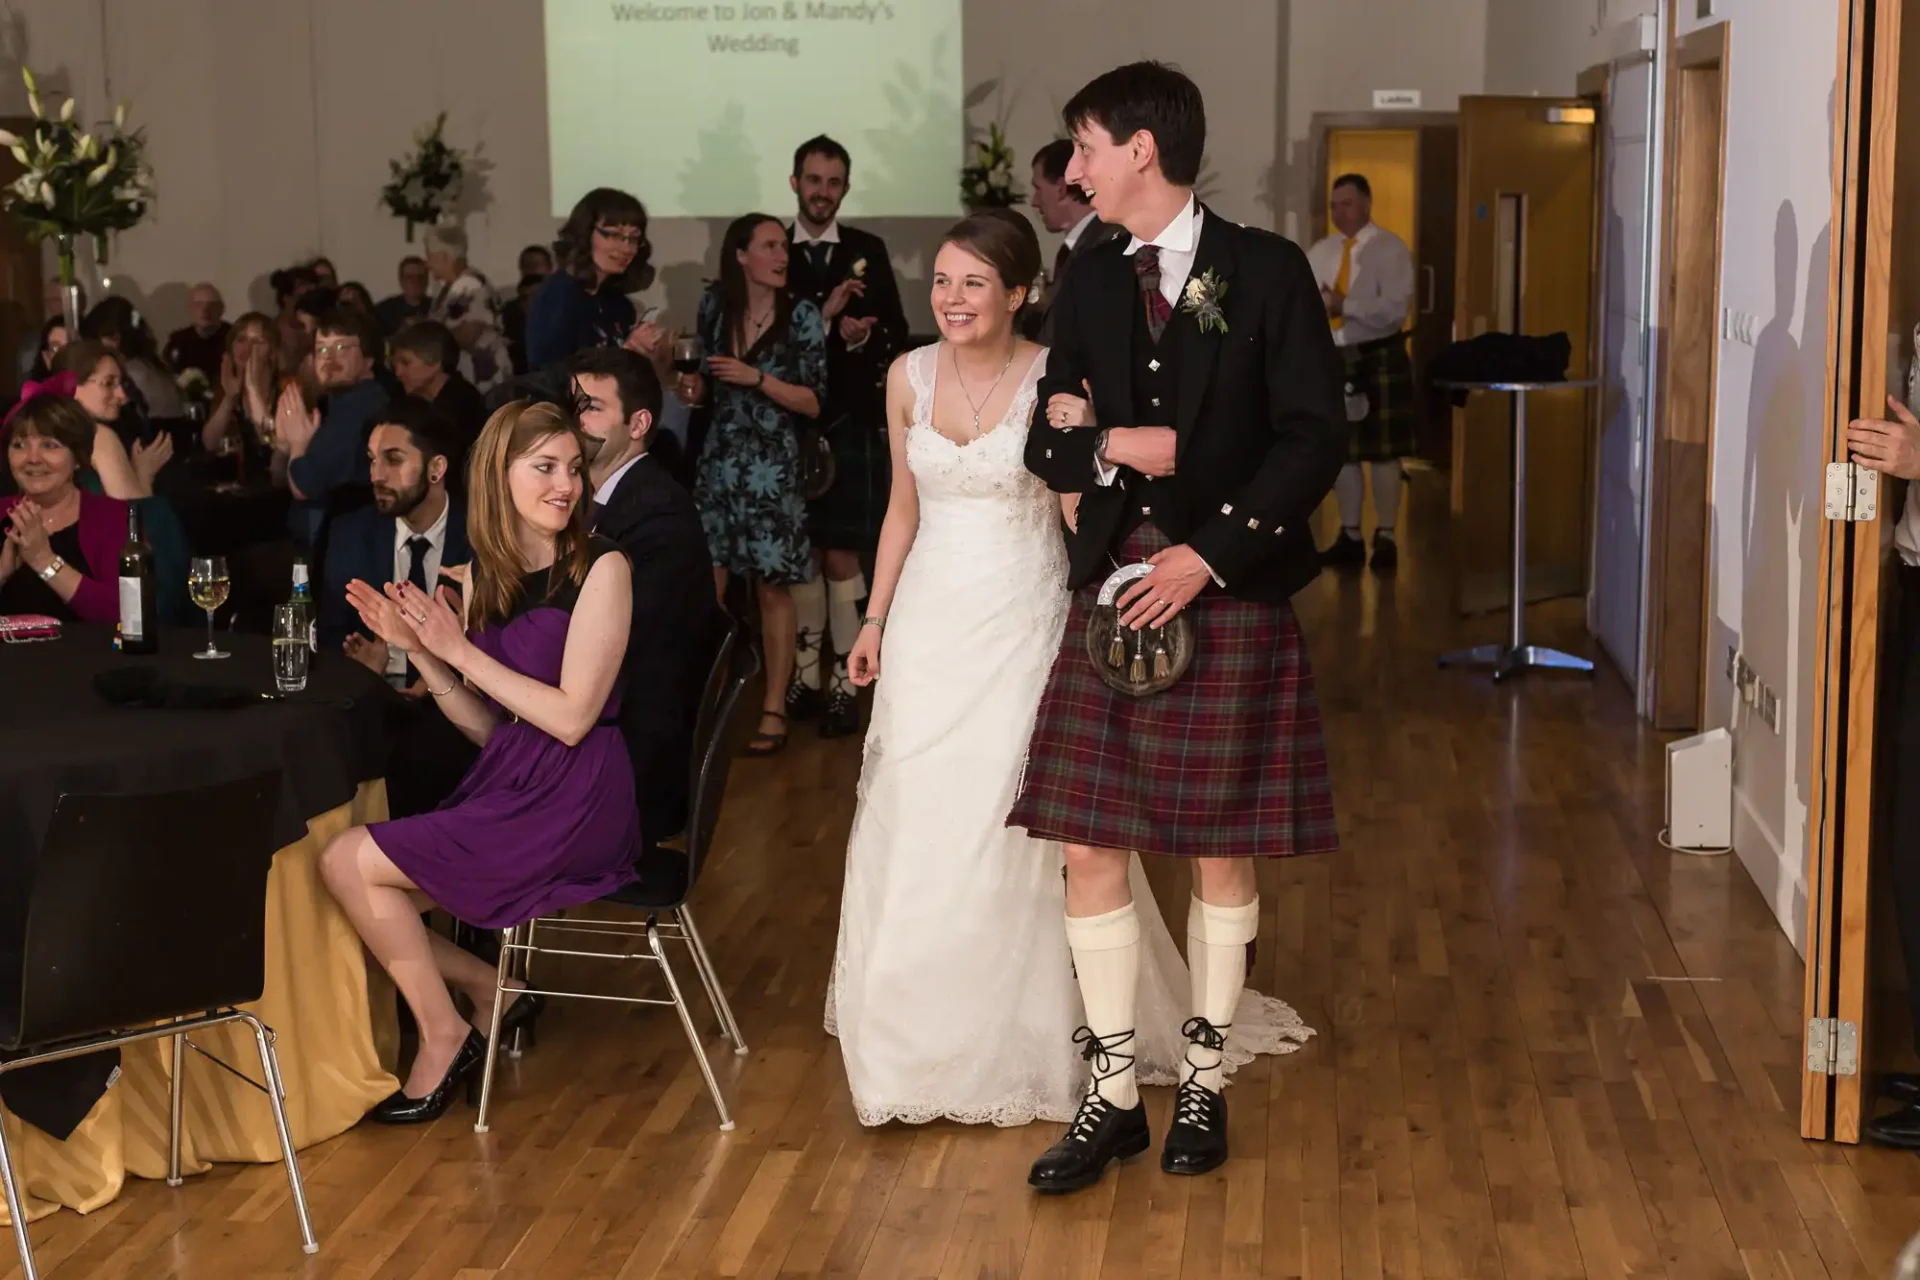 A bride and groom in traditional scottish attire smiling and walking through a hall as guests applaud at their wedding reception.